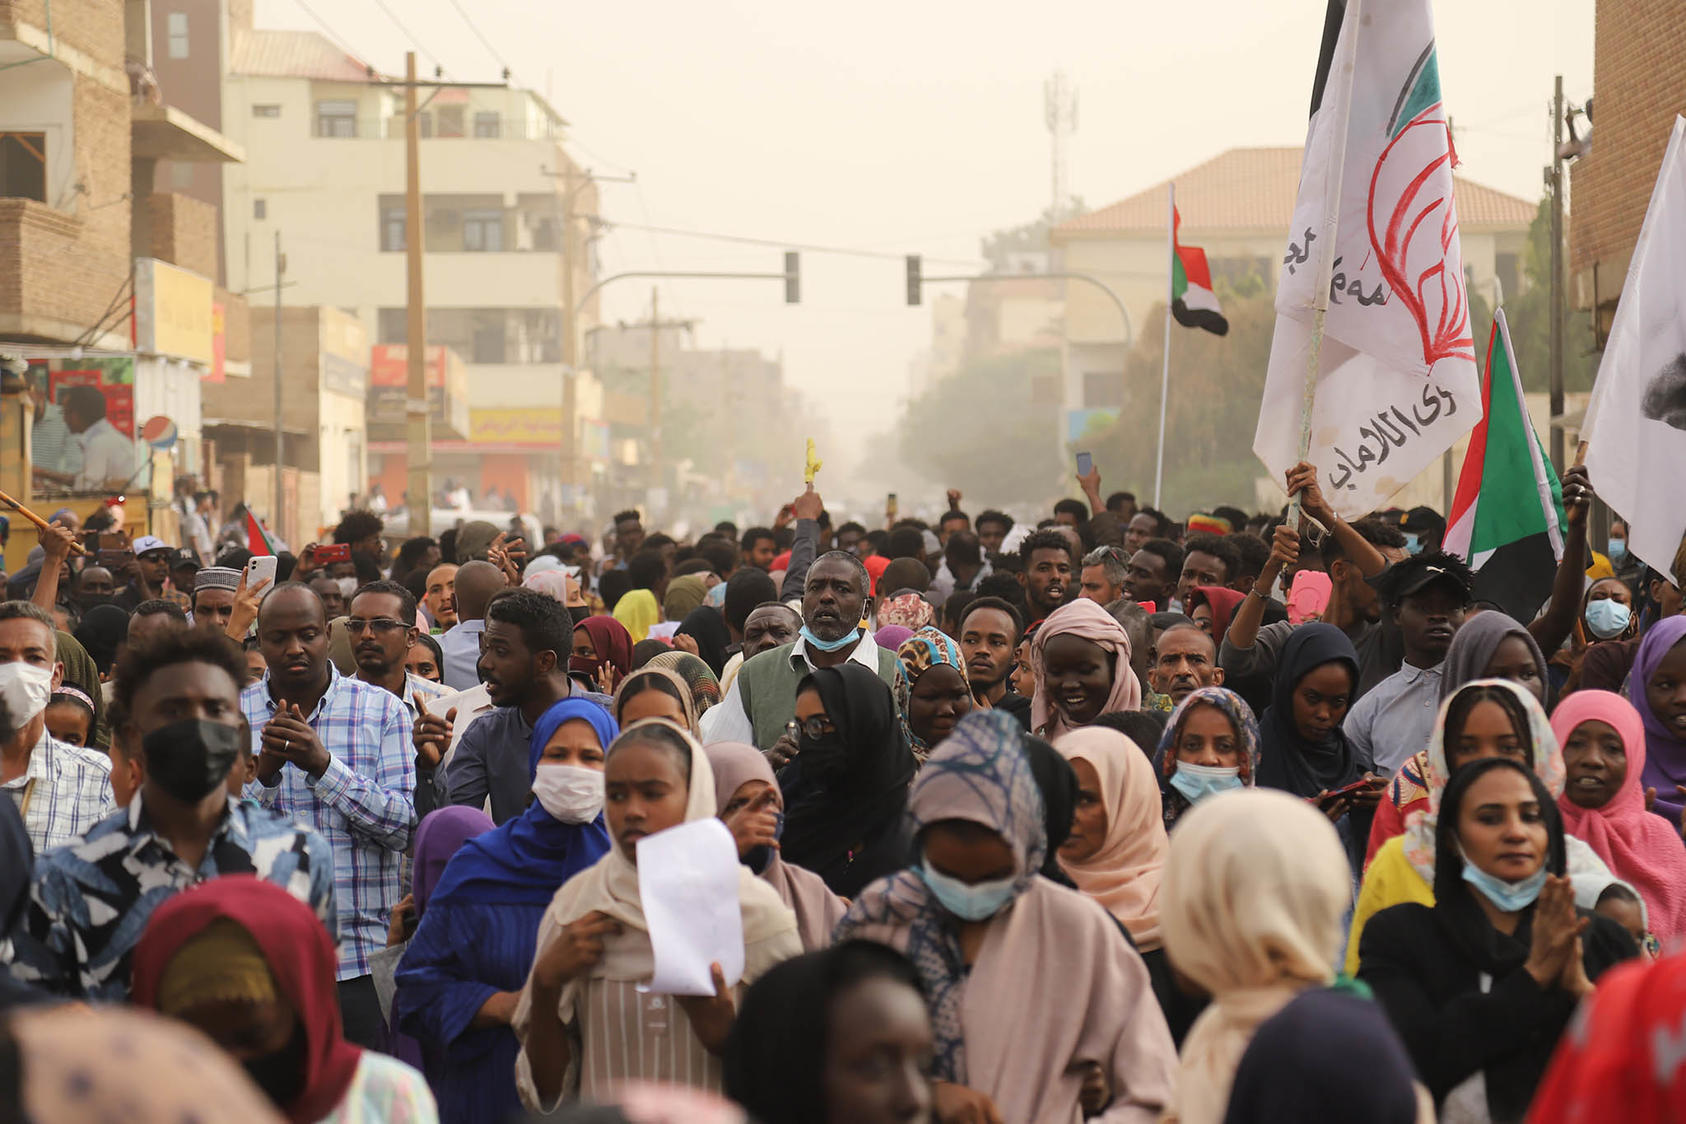 Sudanese, most of them youth, fill a Khartoum street in January 2022 amid the pro-democracy campaign seeking an end to military rule. Youth are leading in the civilian response to the current military infighting. (Faiz Abubakar Muhamed/The New York Times)